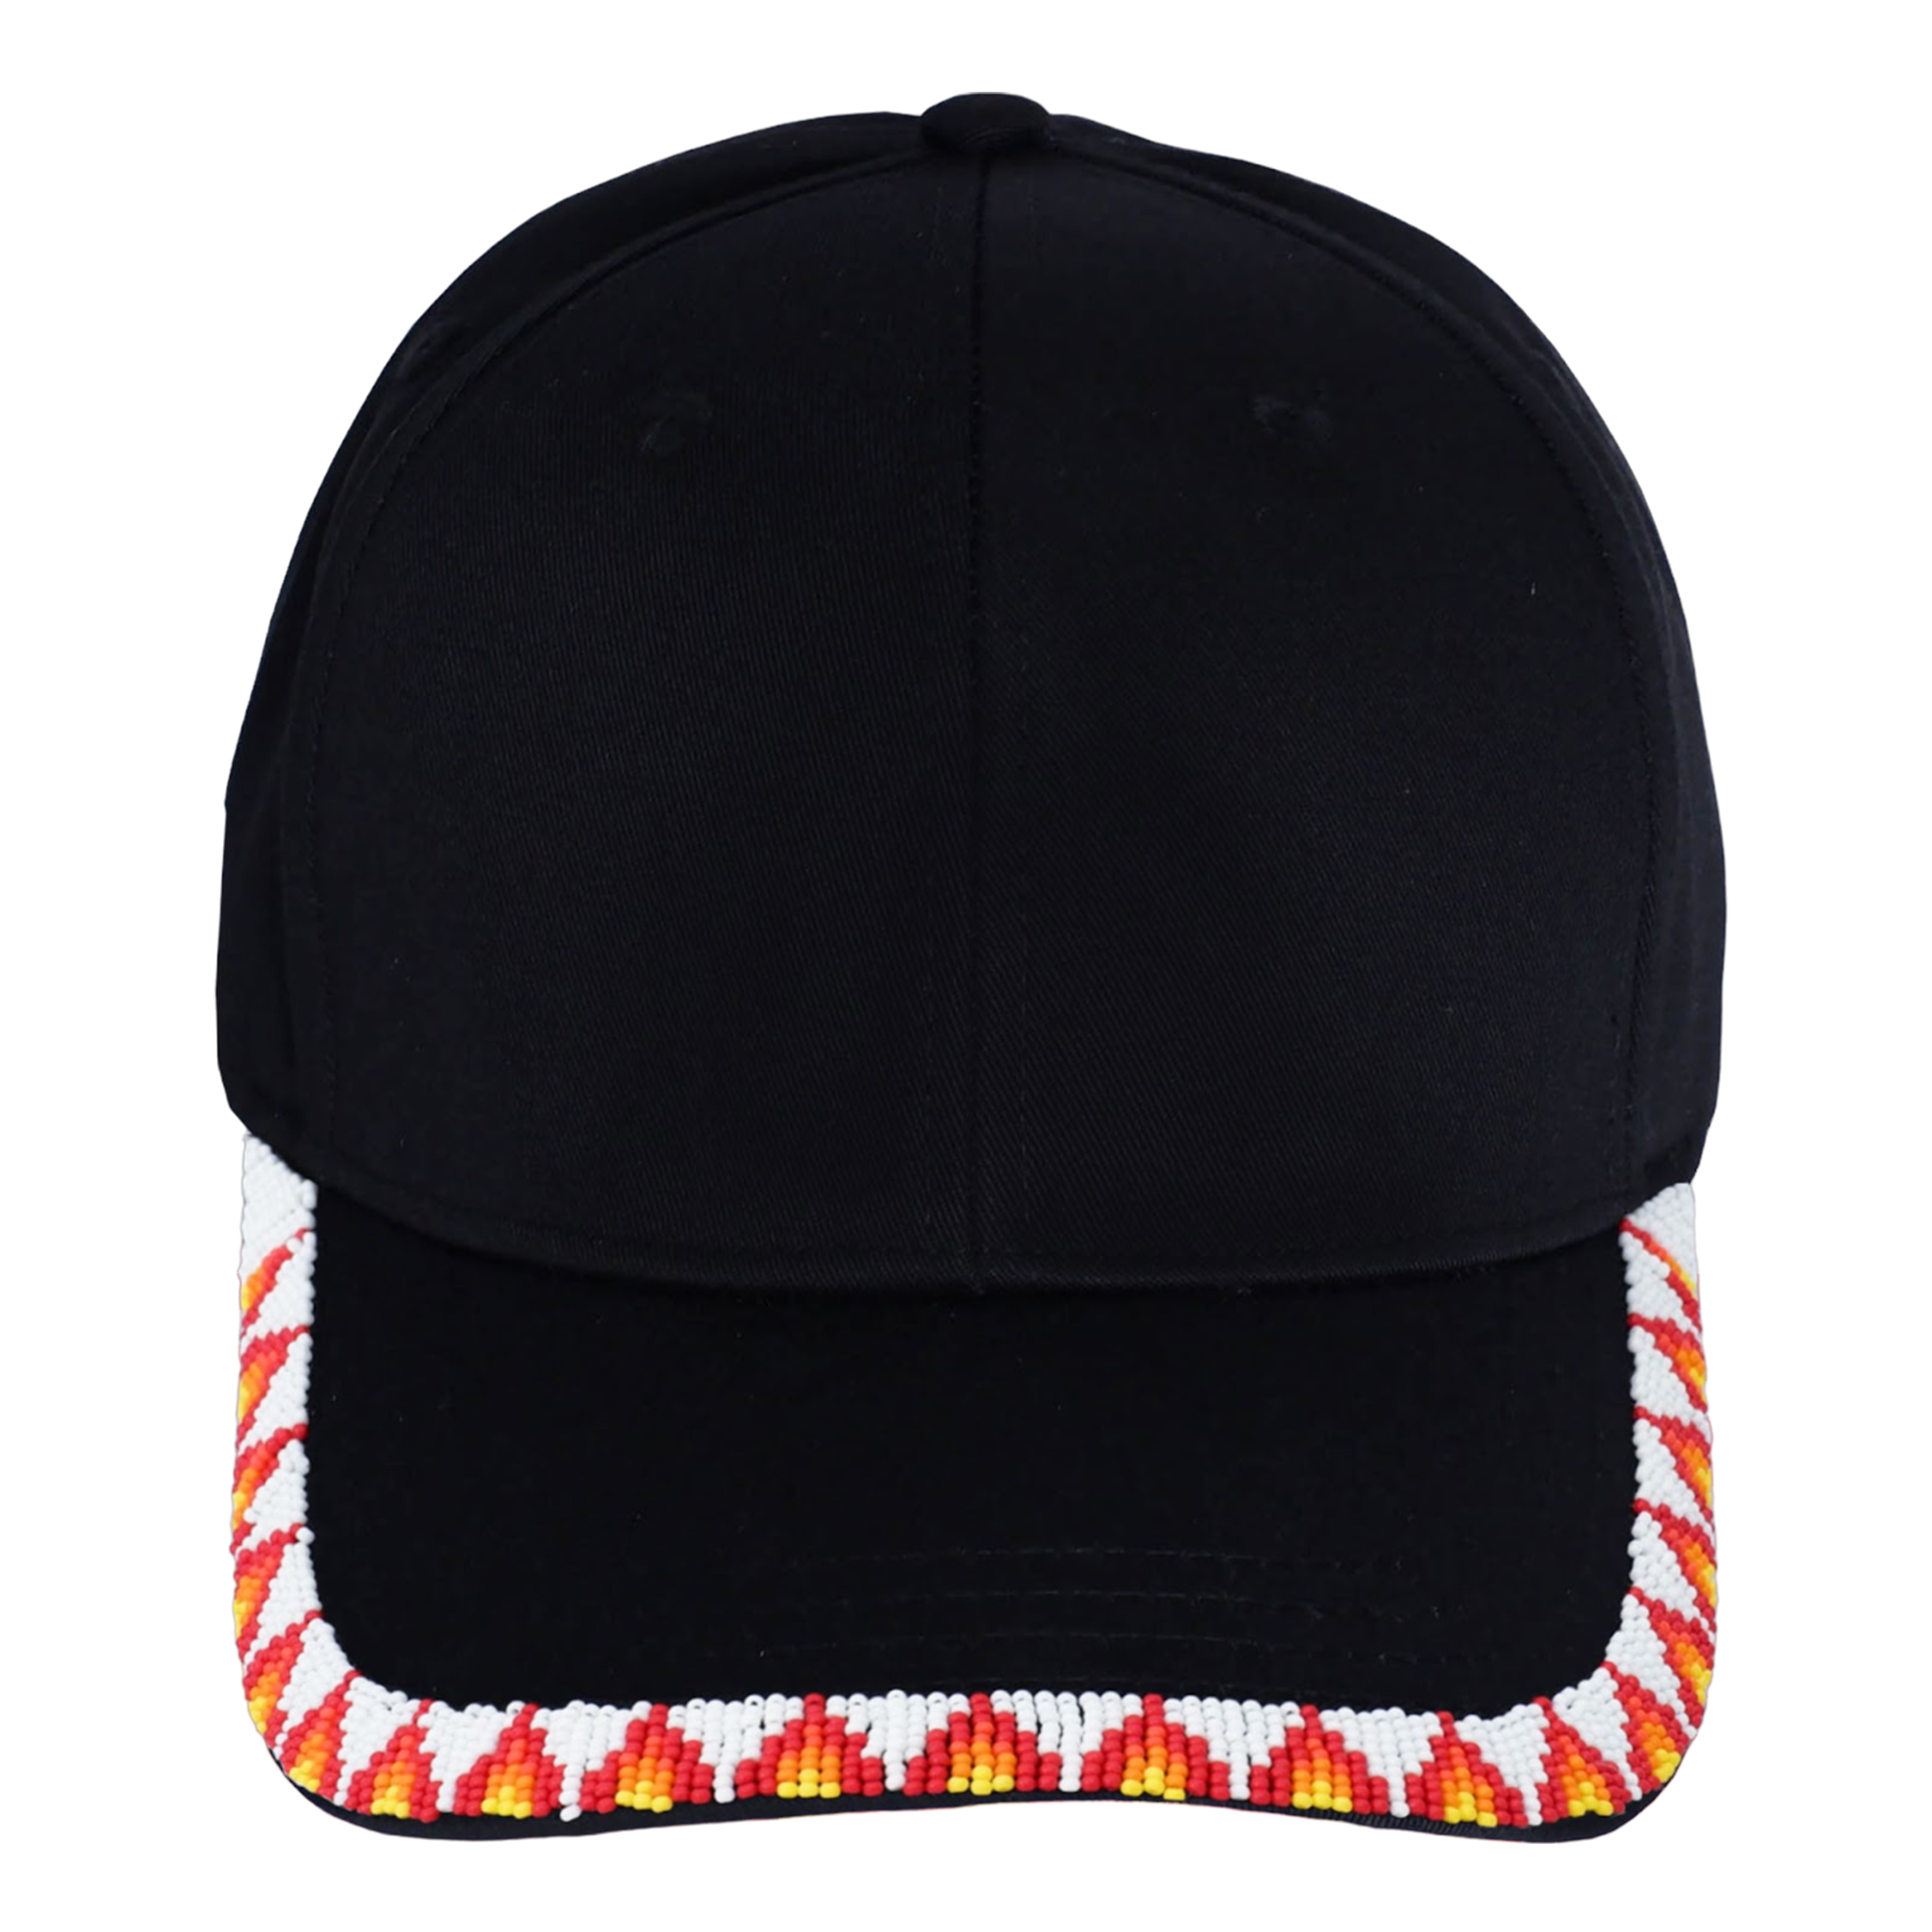 SALE 50% OFF - Baseball Cap With Brim Cotton Unisex Native American Style